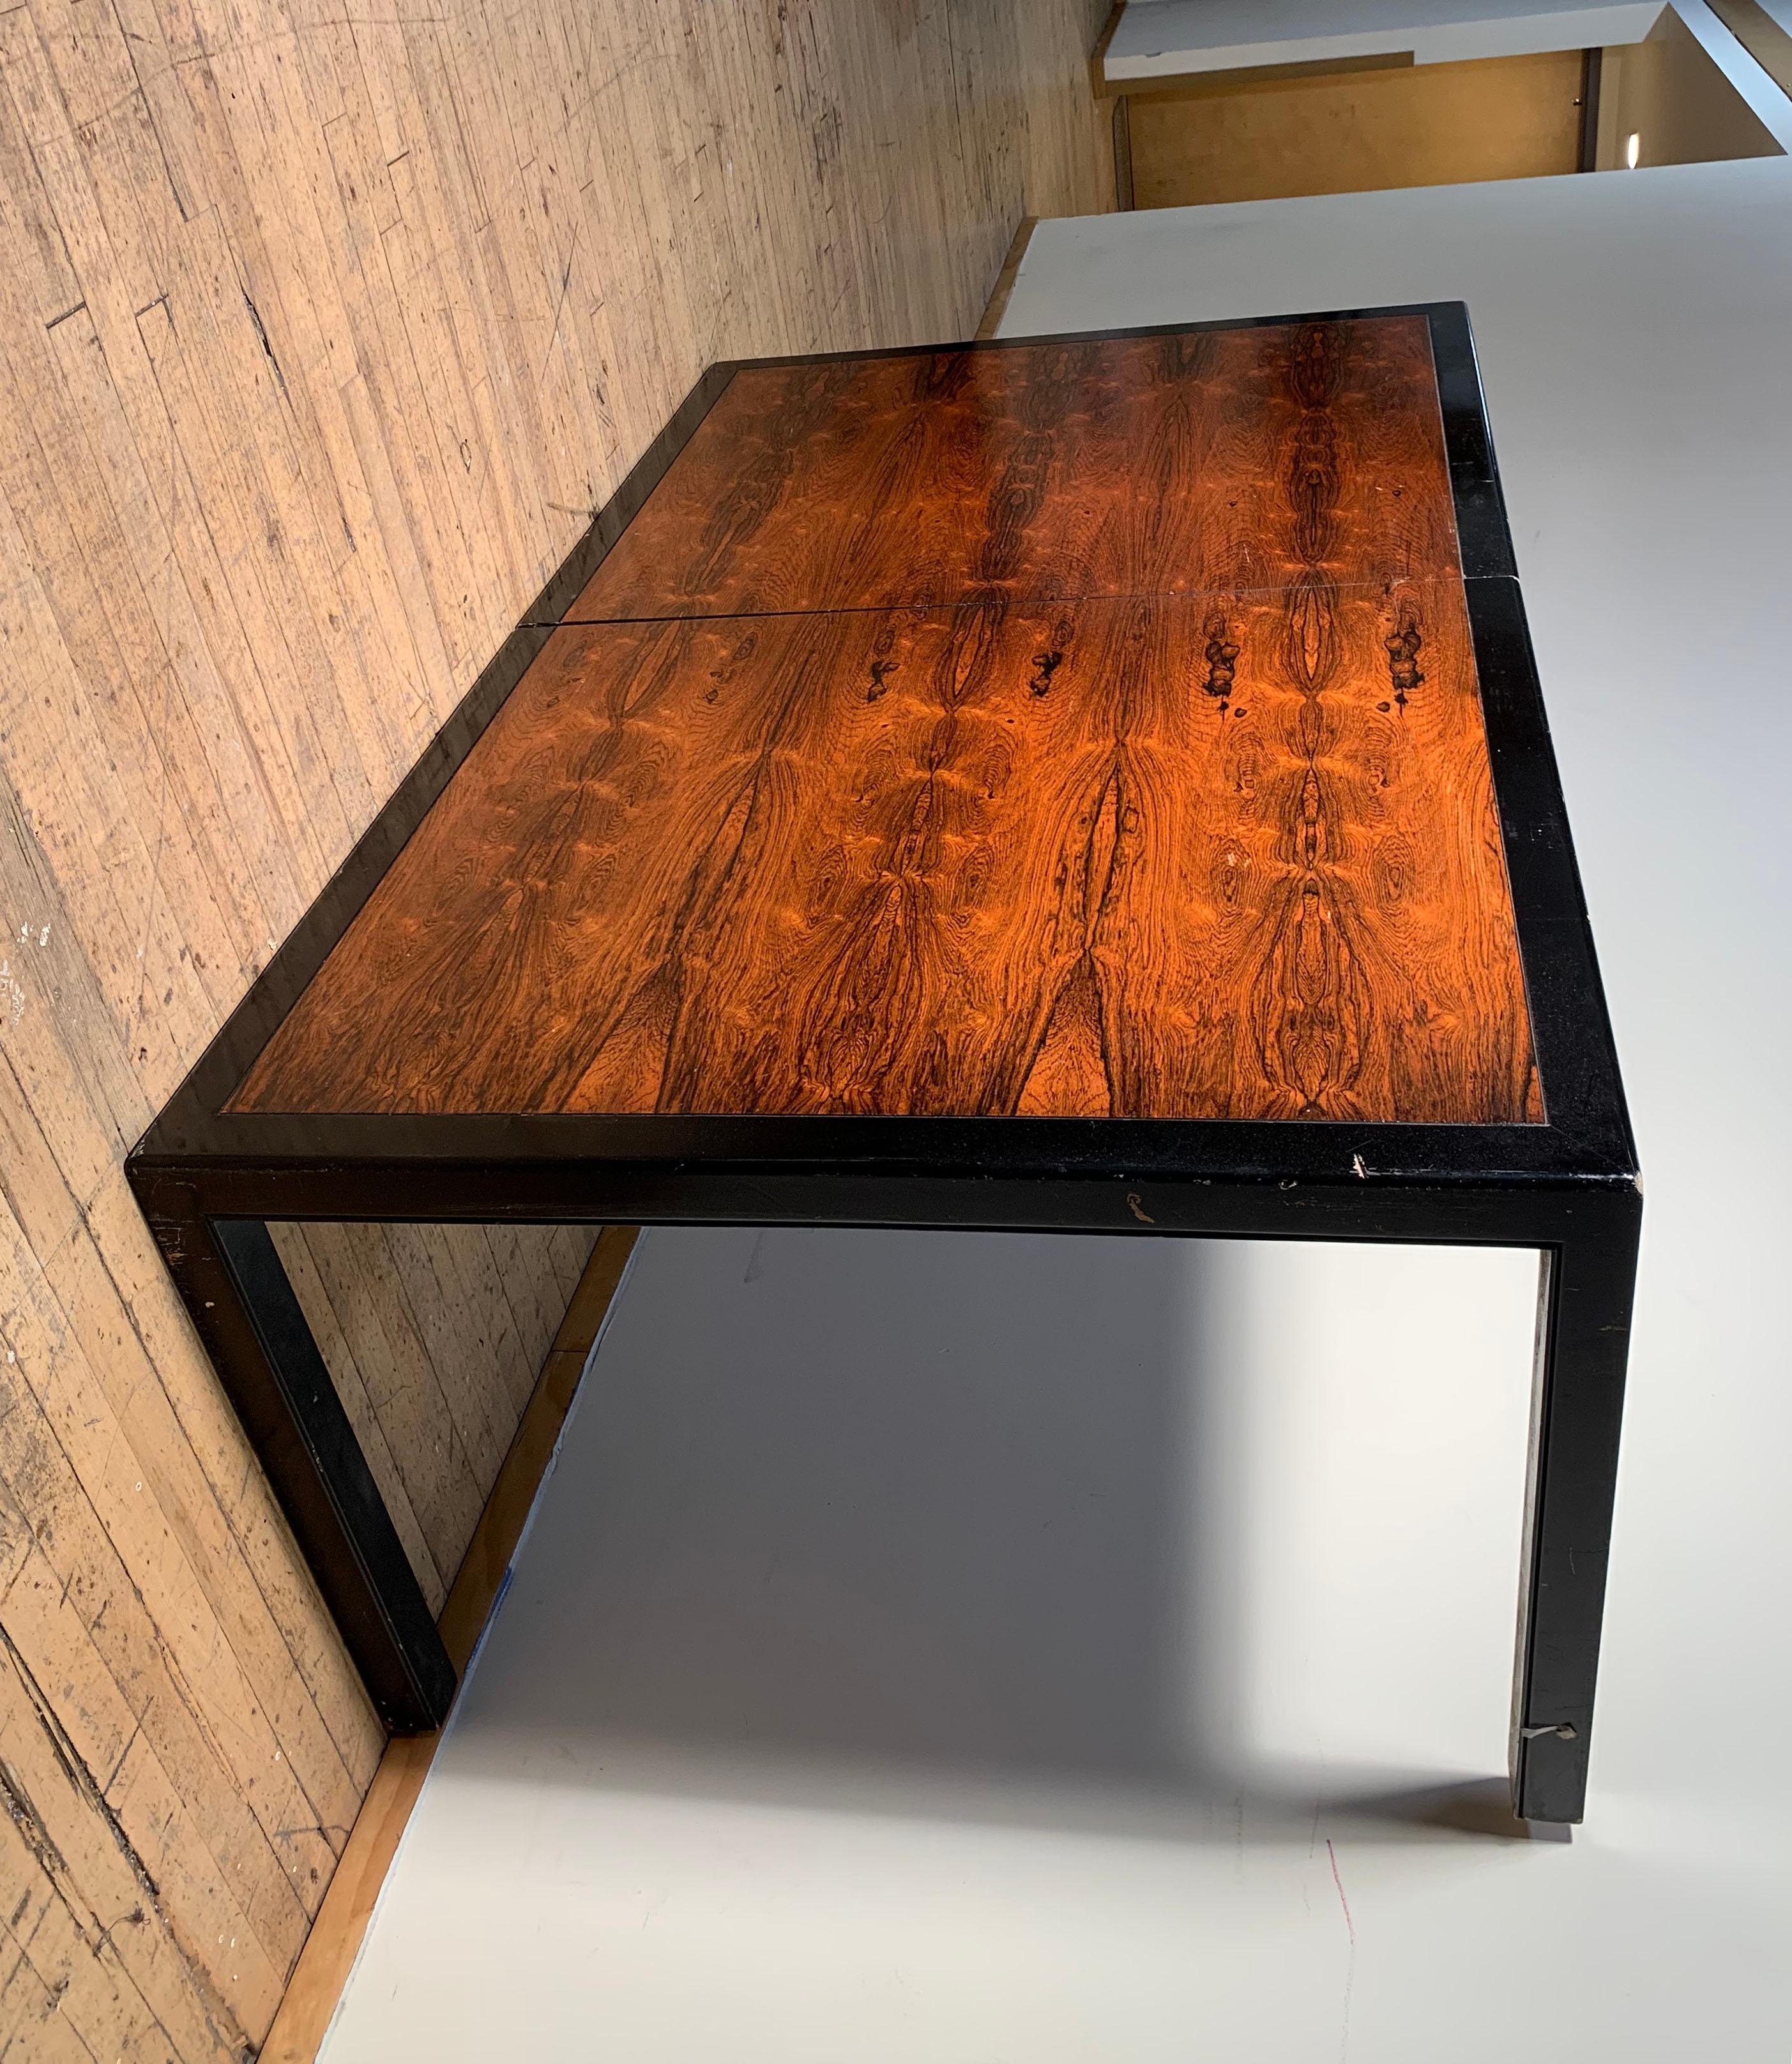 A beautiful Vintage Milo Baughman Rosewood dining table for Directional. Comes with 3 leafs not photographed. Will add photos of these shortly. Modern Parsons leg form with a clean black apron picture frame of Rosewood. High end